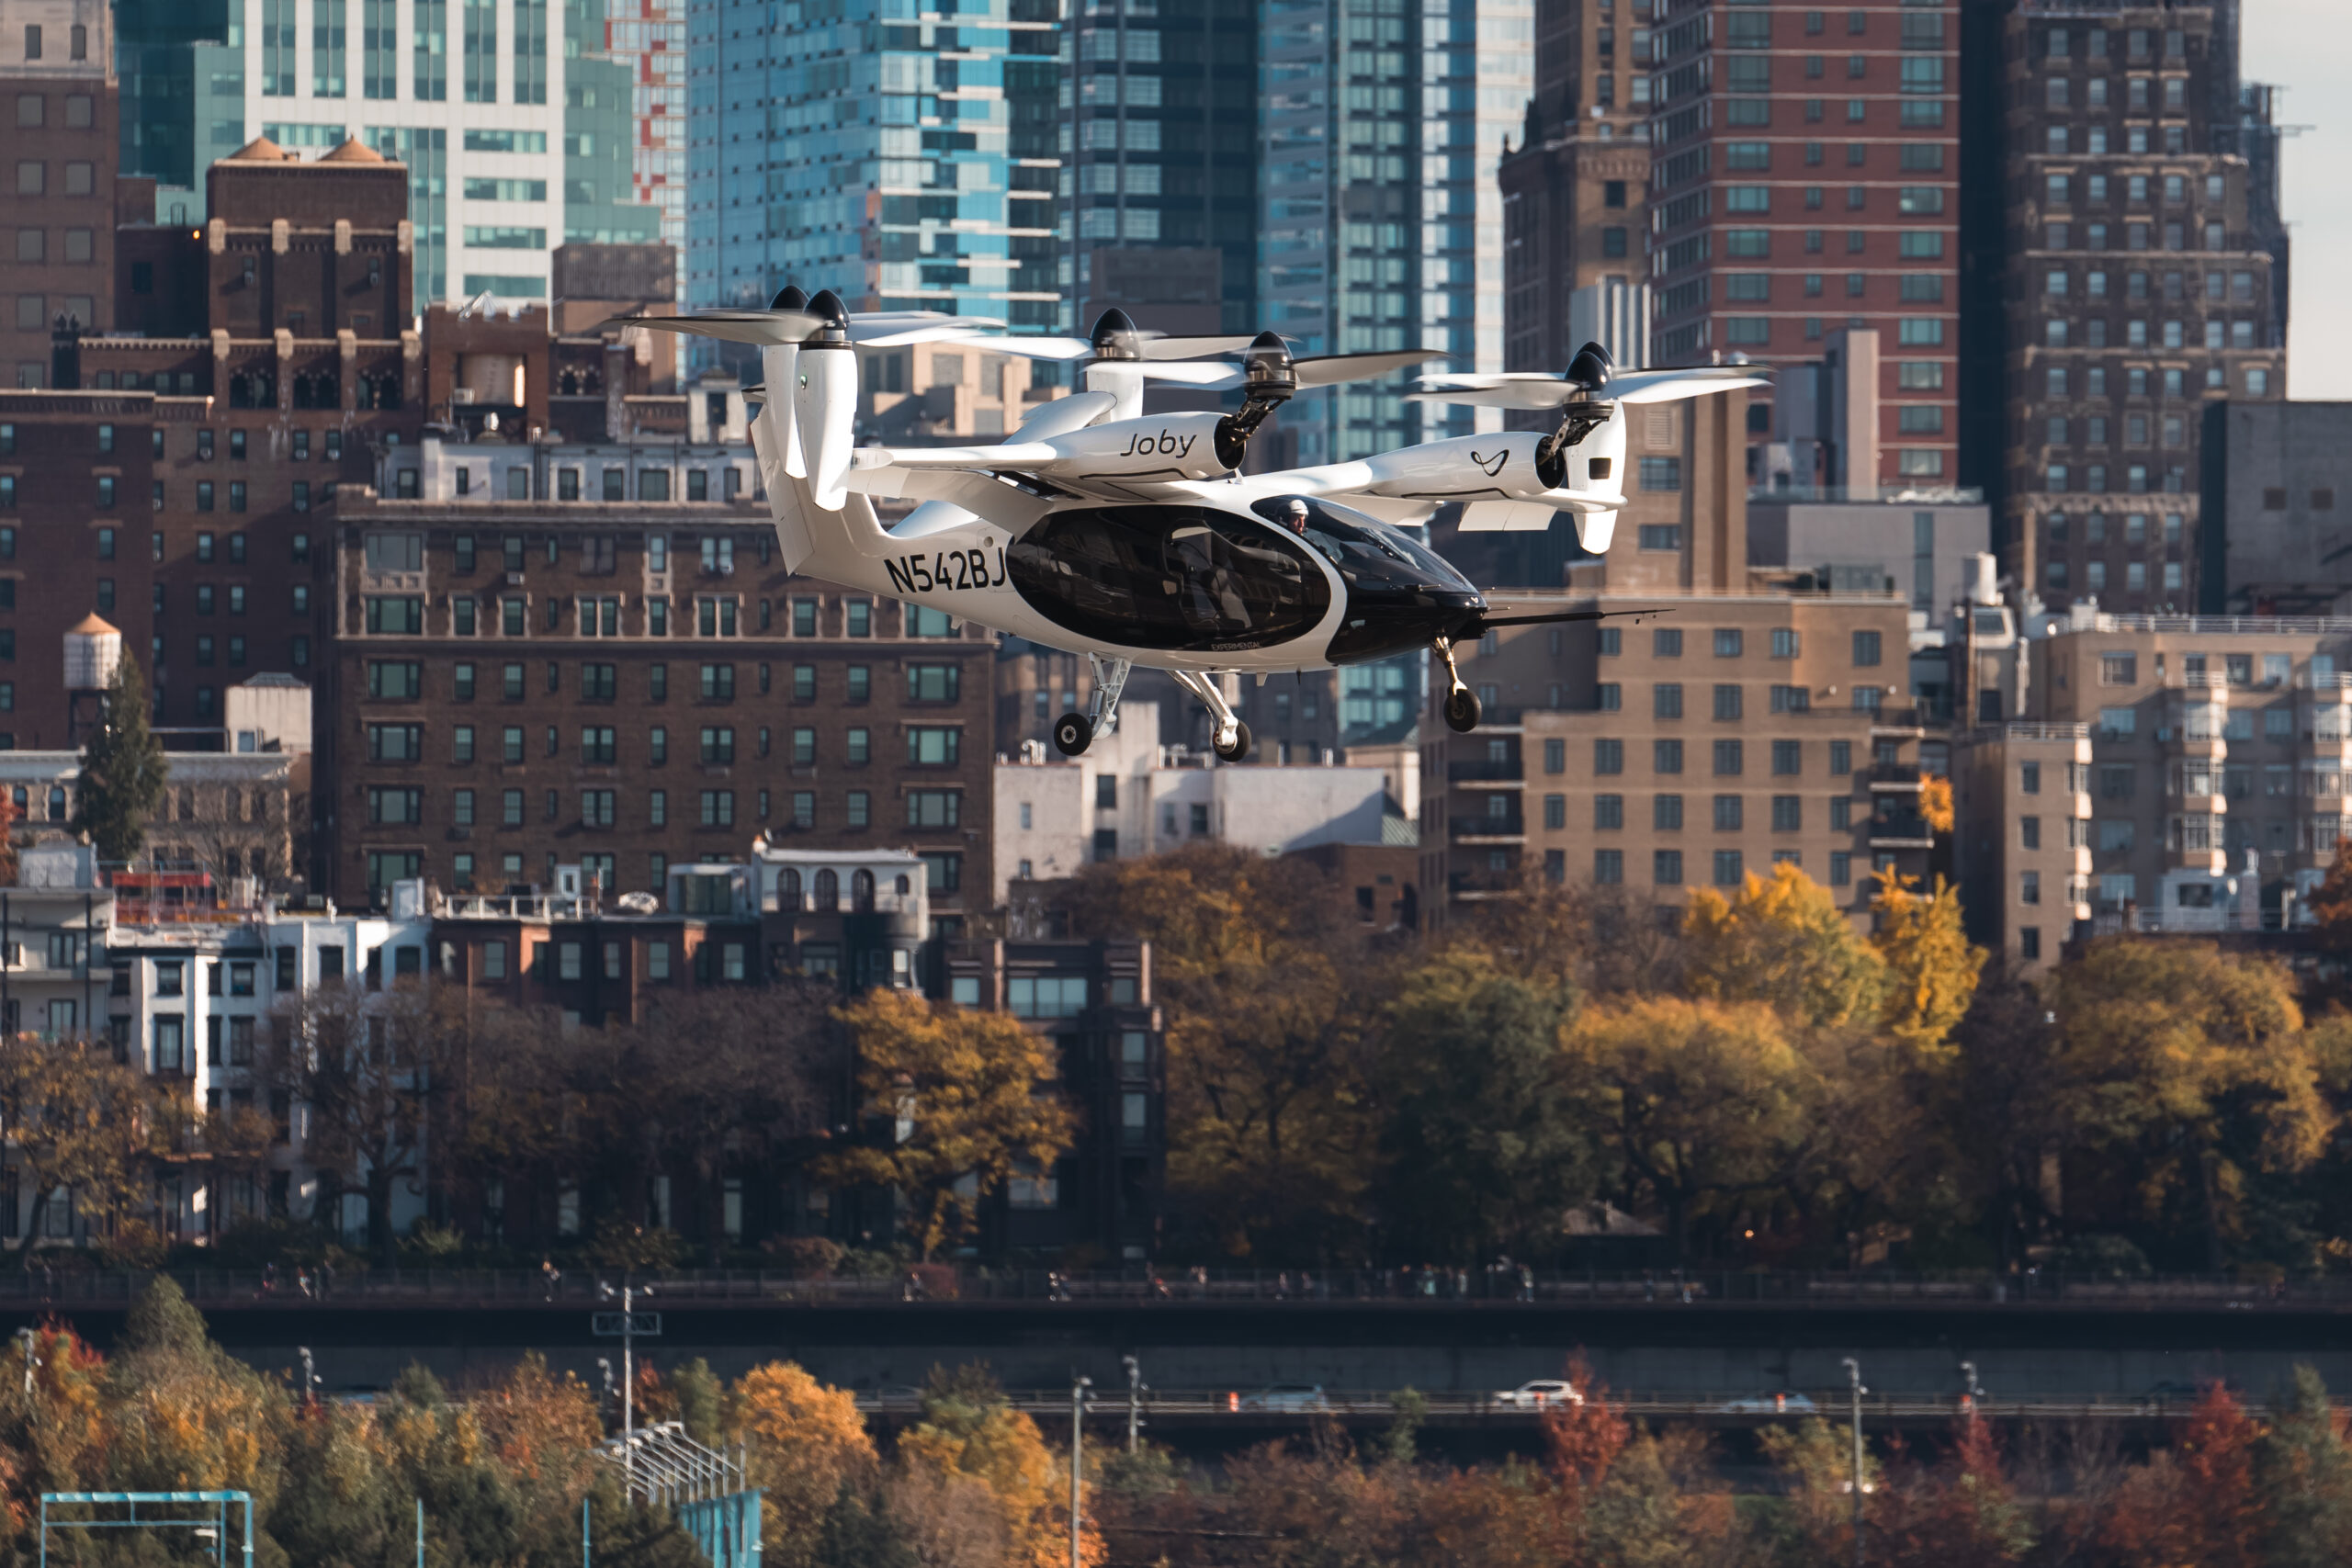 Joby’s electric air taxi in the skies above New York City, piloted by James “Buddy” Denham